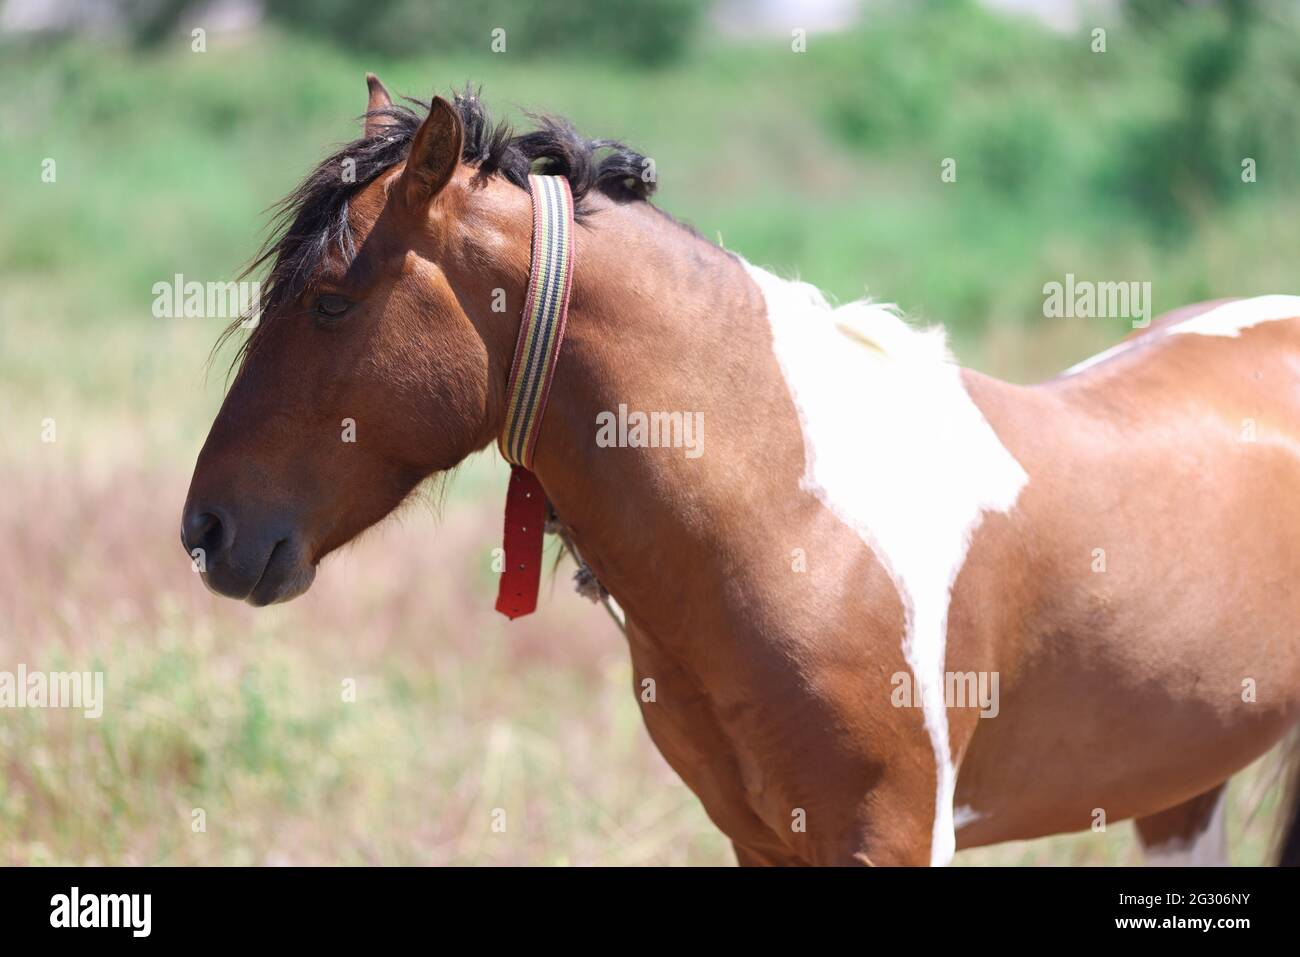 Wild skewbald horse stands in green pasture Stock Photo